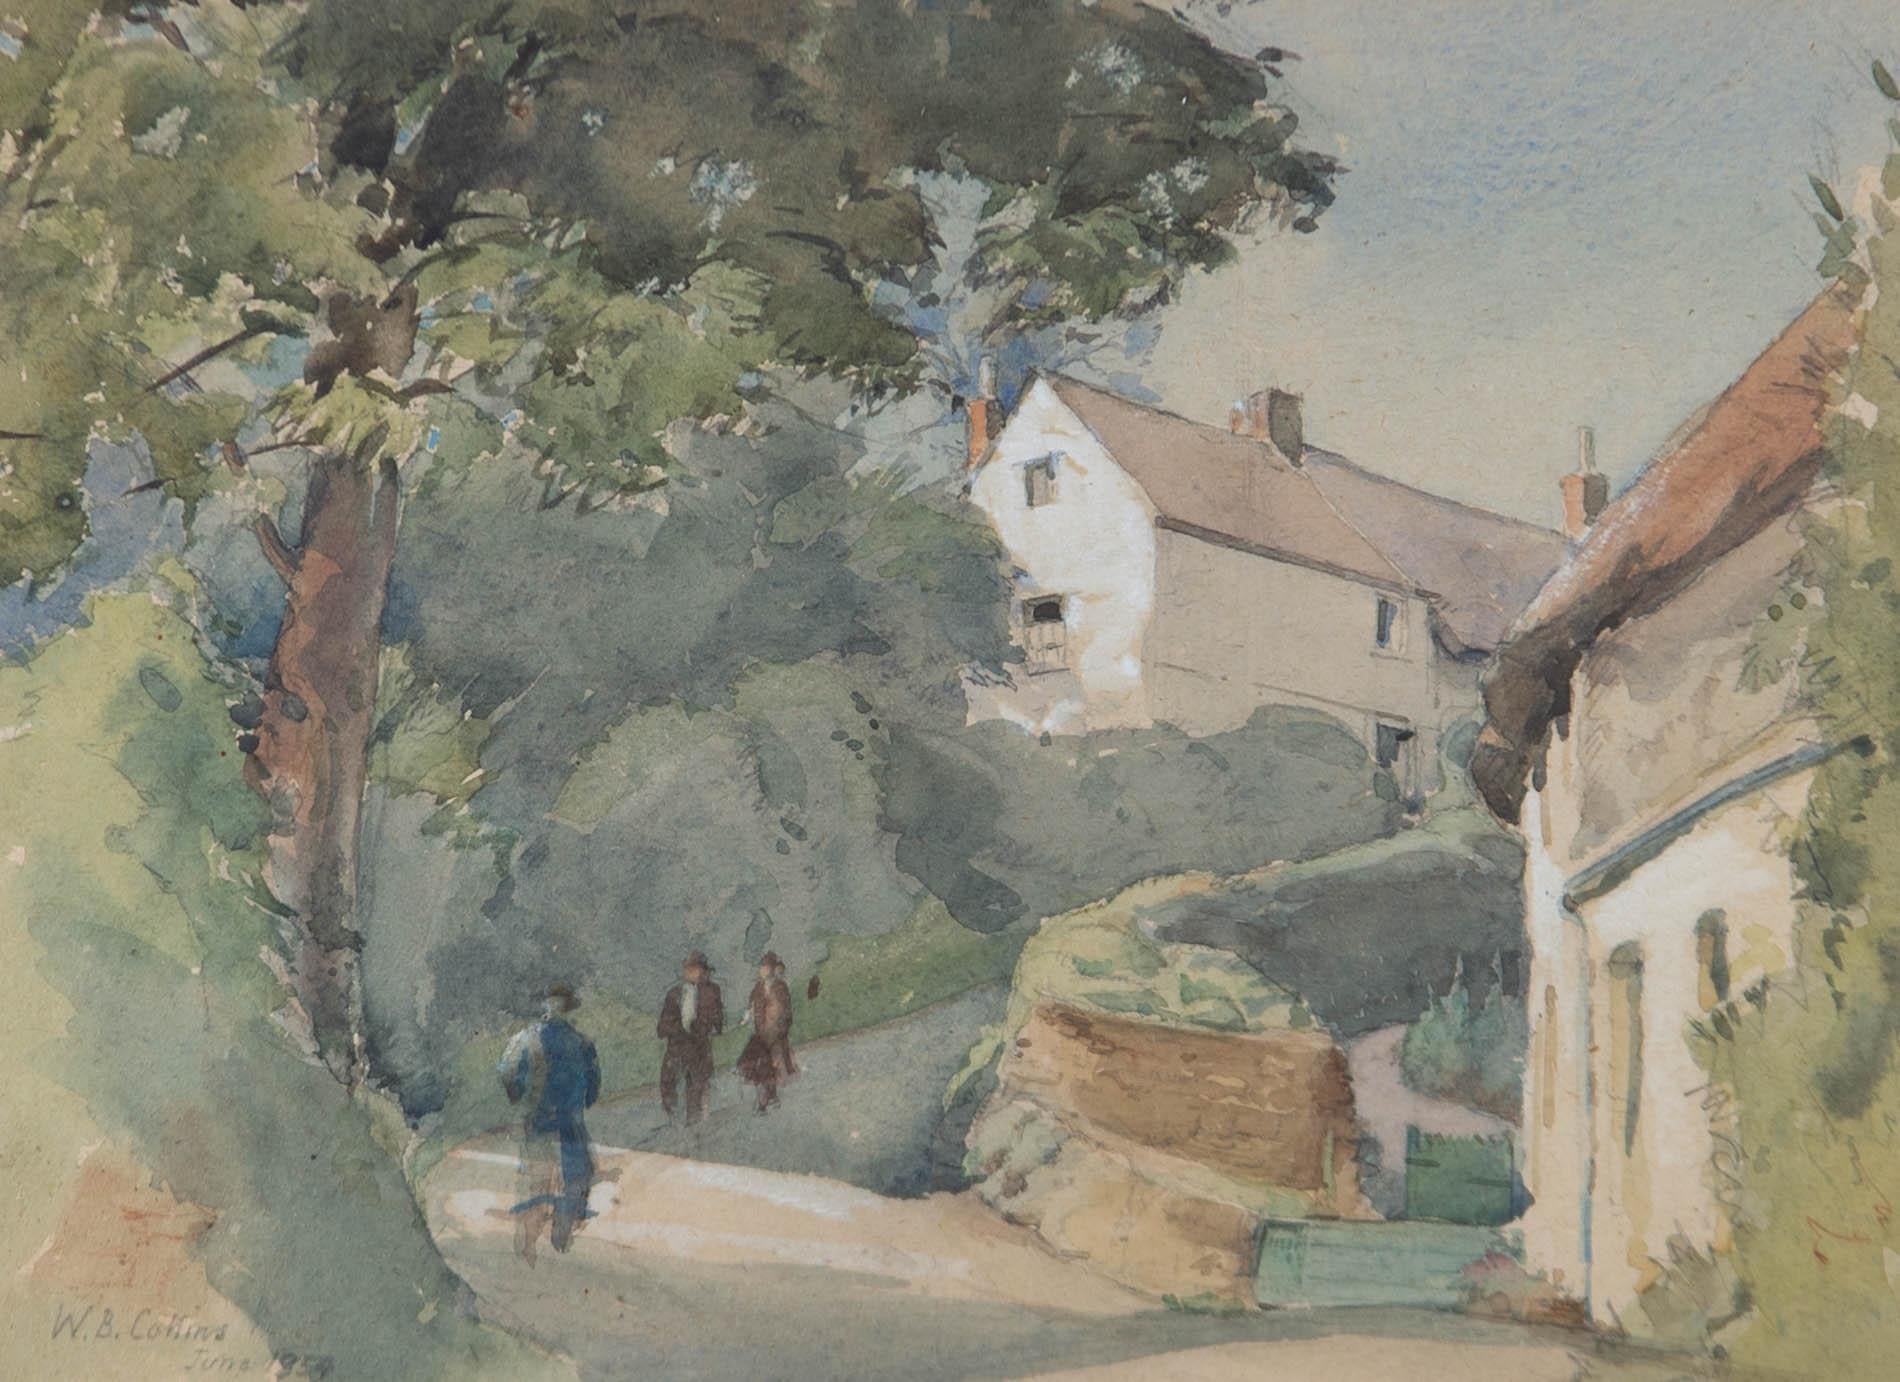 Figures walk contently along a quiet country path in this fine watercolour study of a sleepy village. The artwork is finished with subtle body colour, and is signed and dated in the bottom left. Well presented in a gilded wood frame with a washline